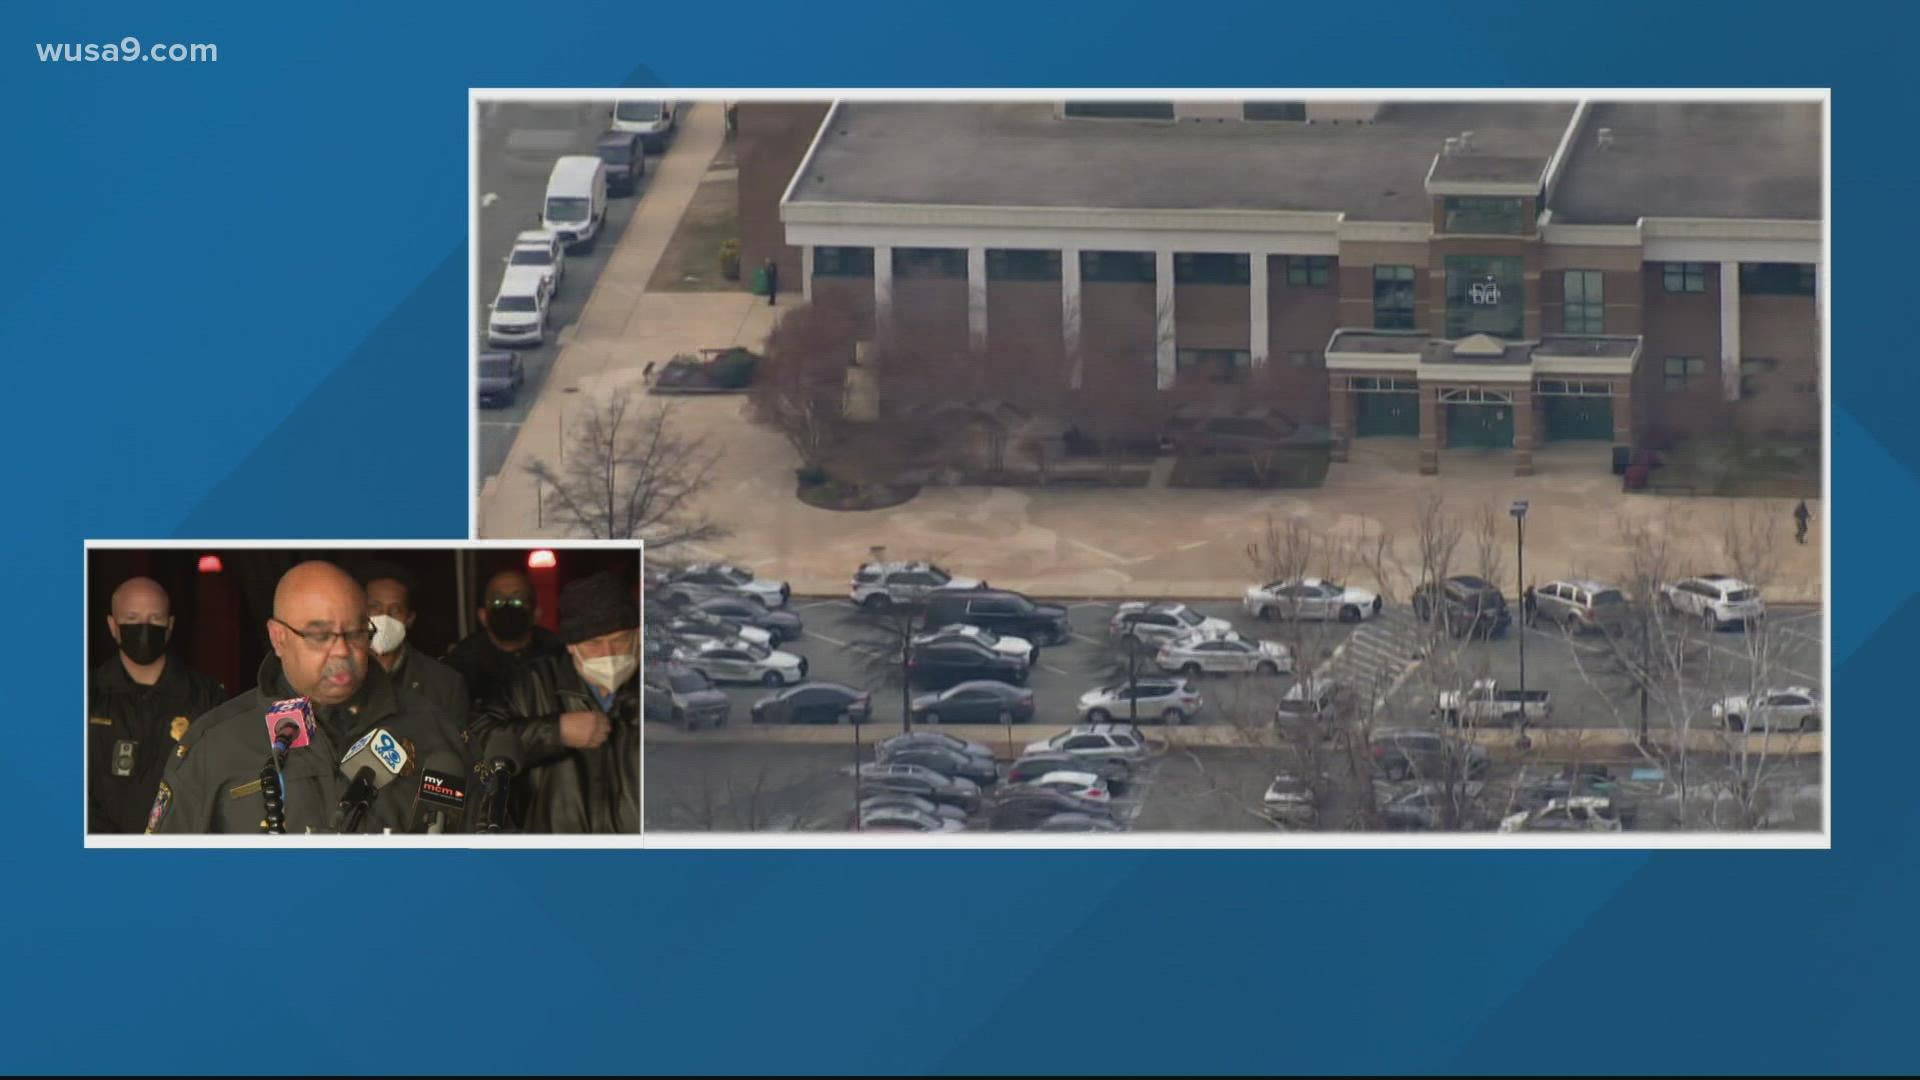 Montgomery County Police provide an update on the shooting at Magruder High School, with 1 student injured and another in custody.